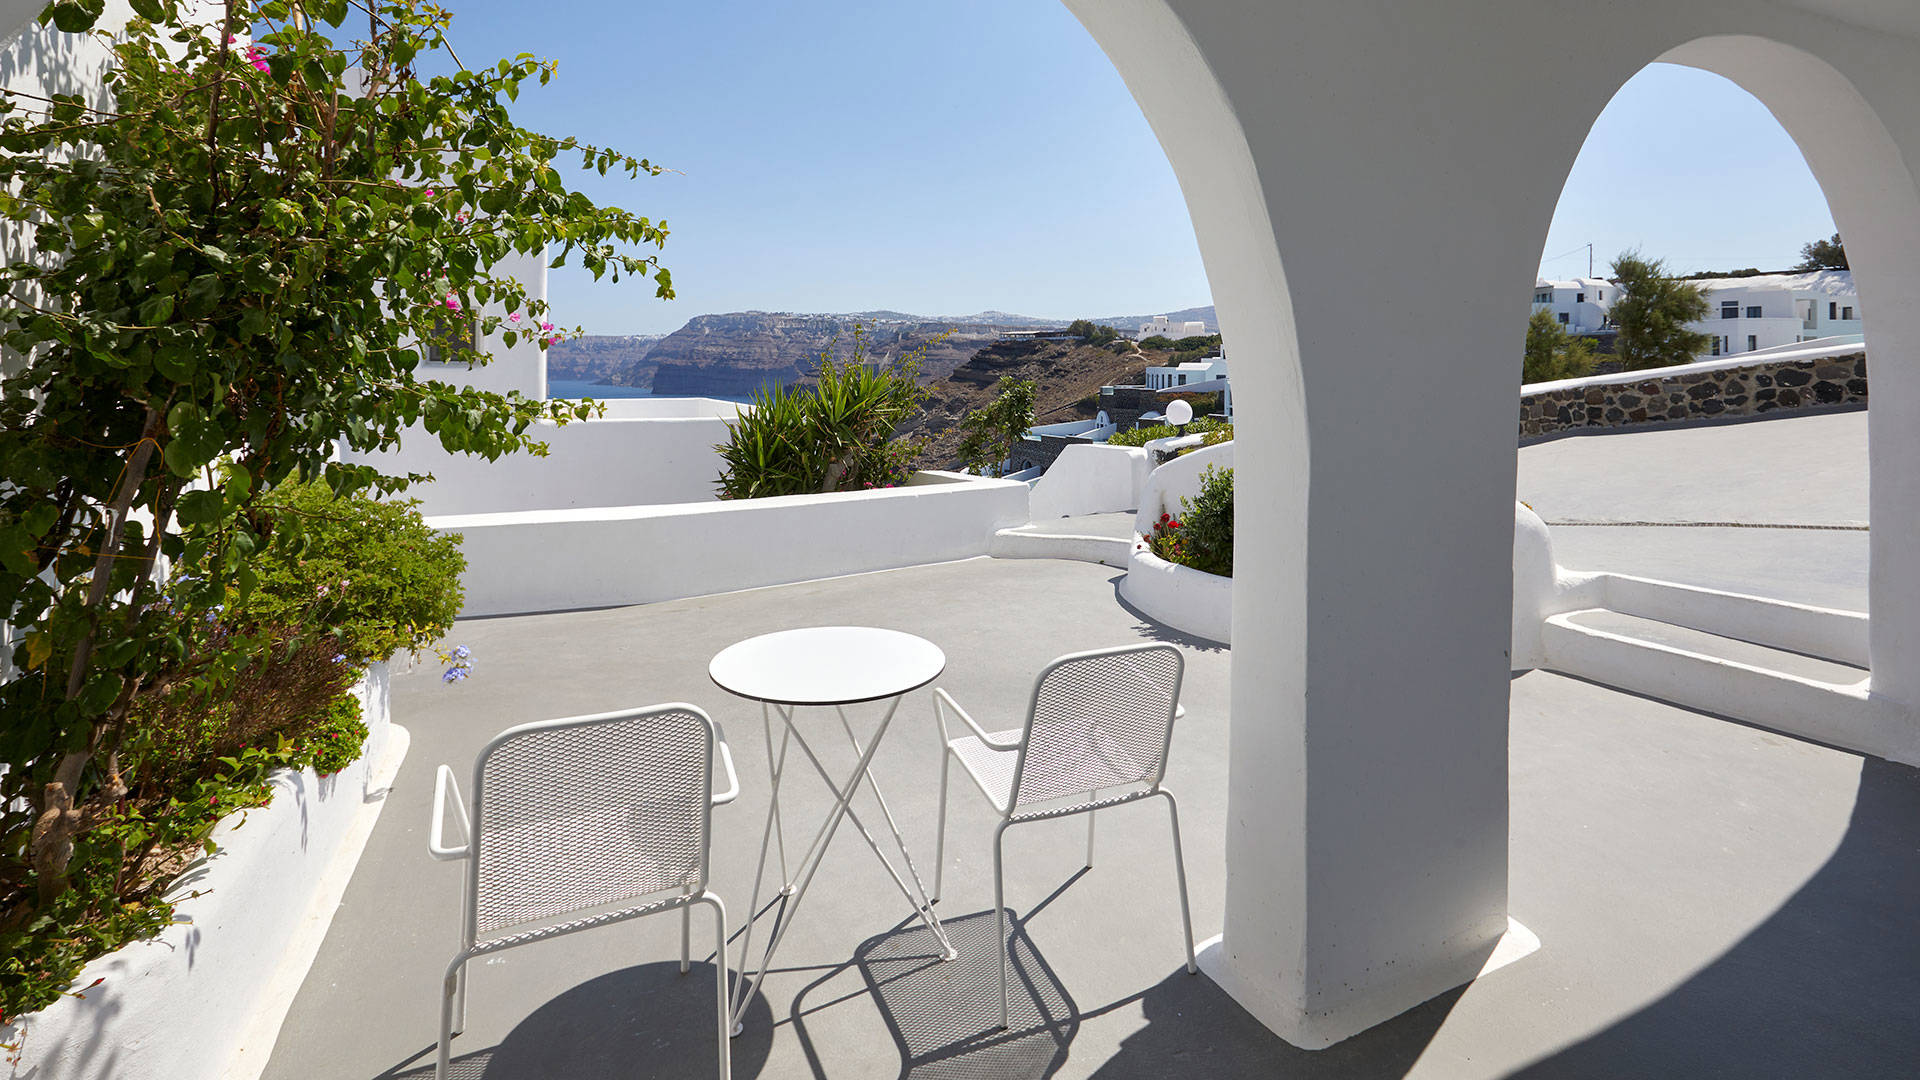 
Santorini View Hotel patio with flowers, table seats and sea view